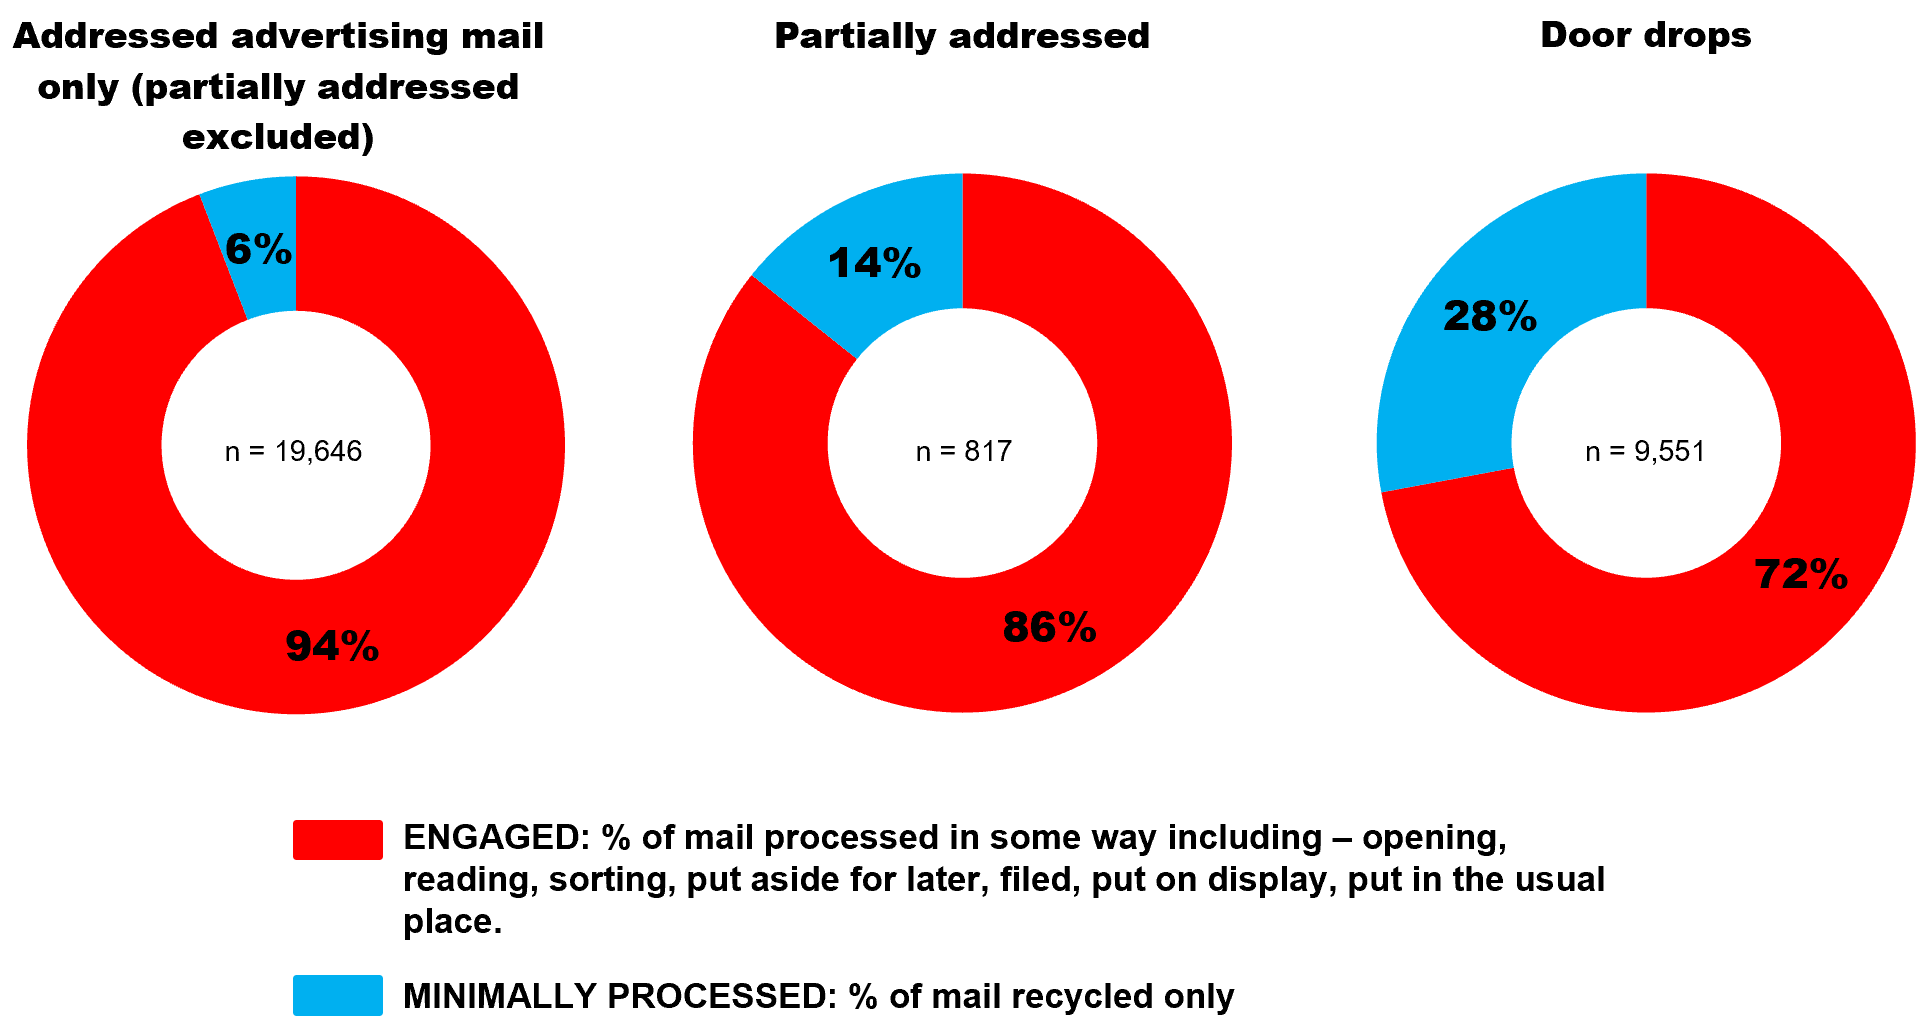 Partially Addressed Mail vs Door Drops